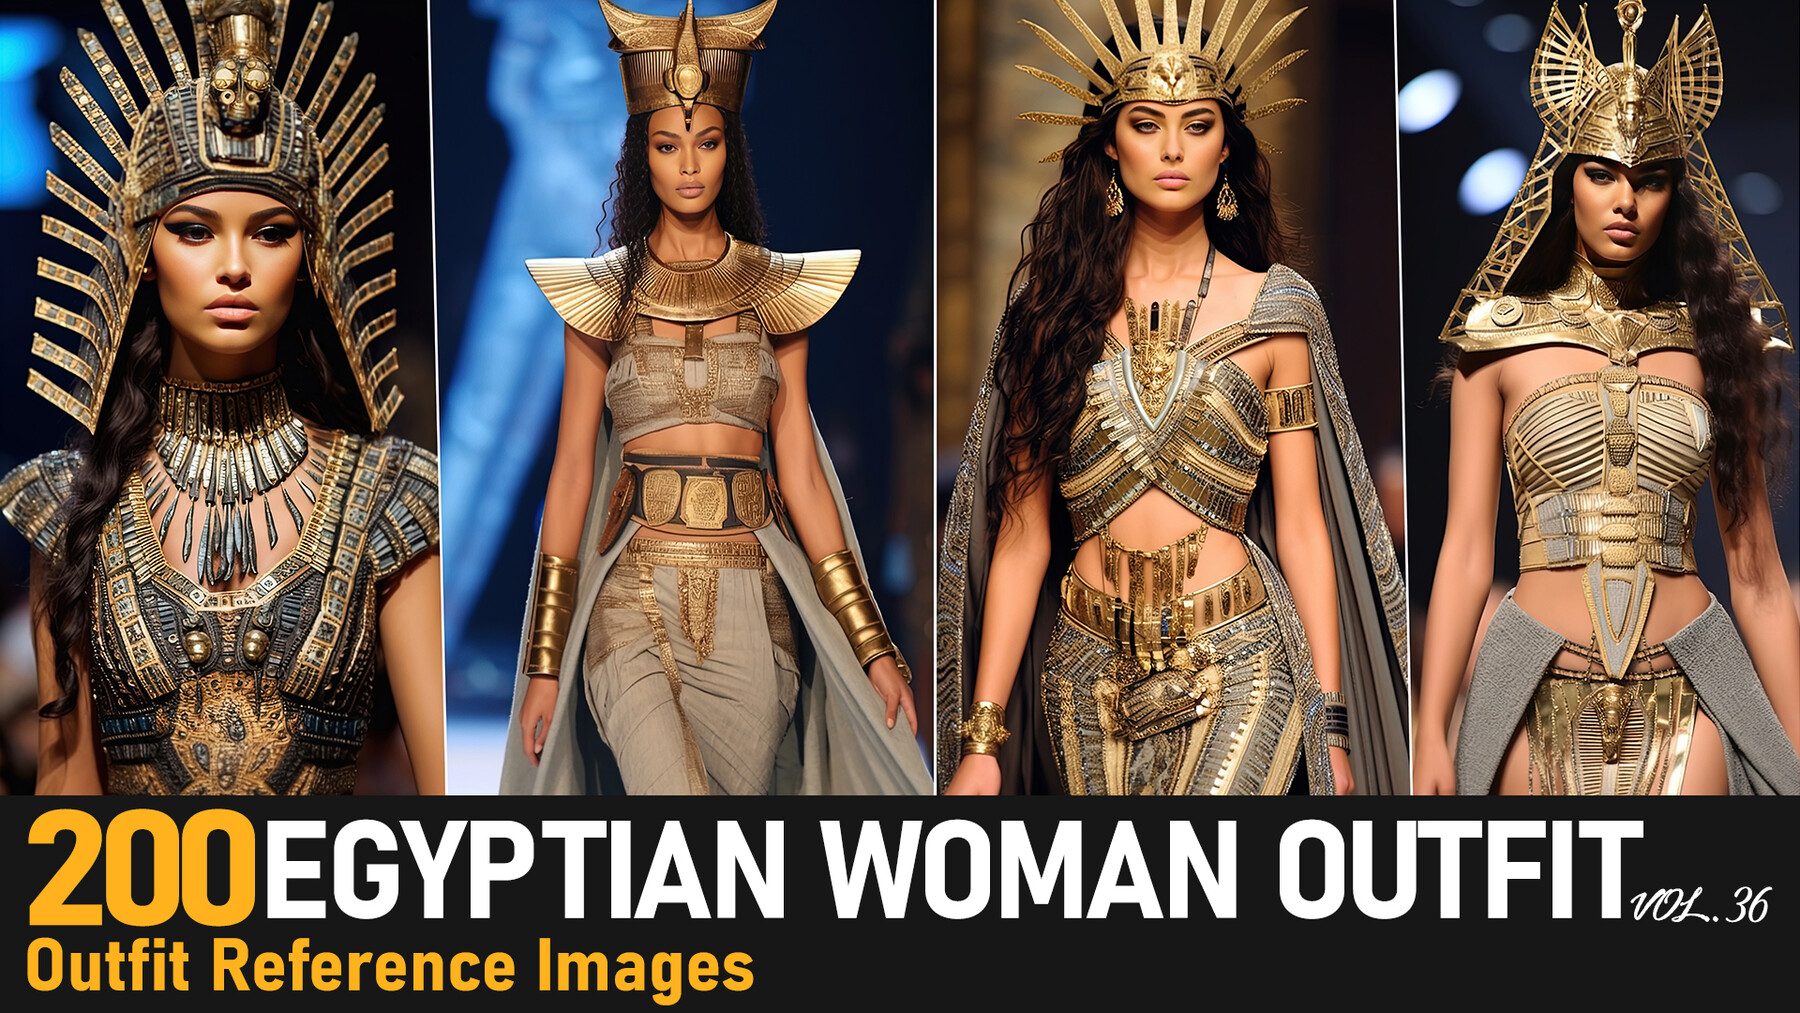 ArtStation - Egyptian Woman Outfit VOL.36|4K Reference Images | Artworks